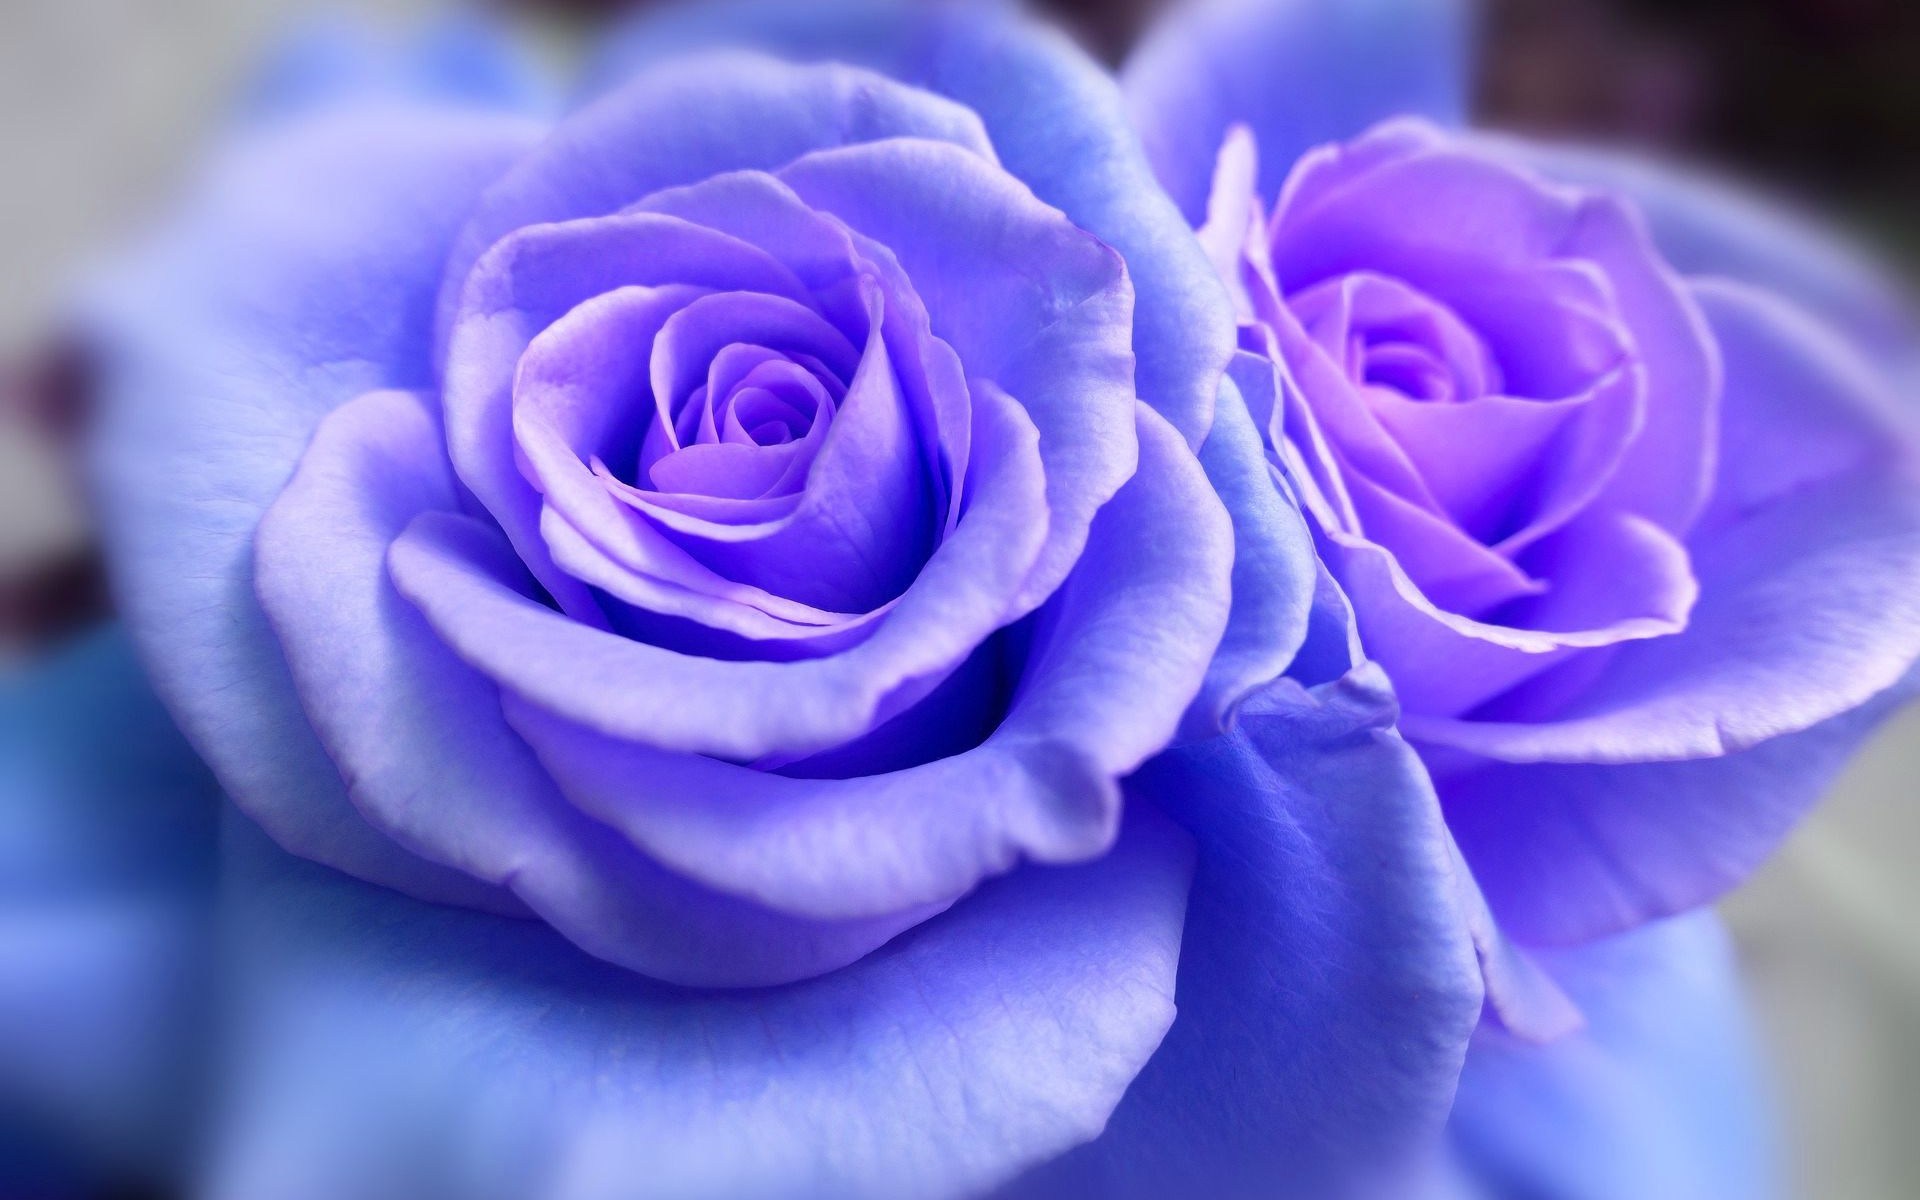 Mobile wallpaper: Flowers, Flower, Rose, Earth, Blue Rose, Blue Flower,  384069 download the picture for free.